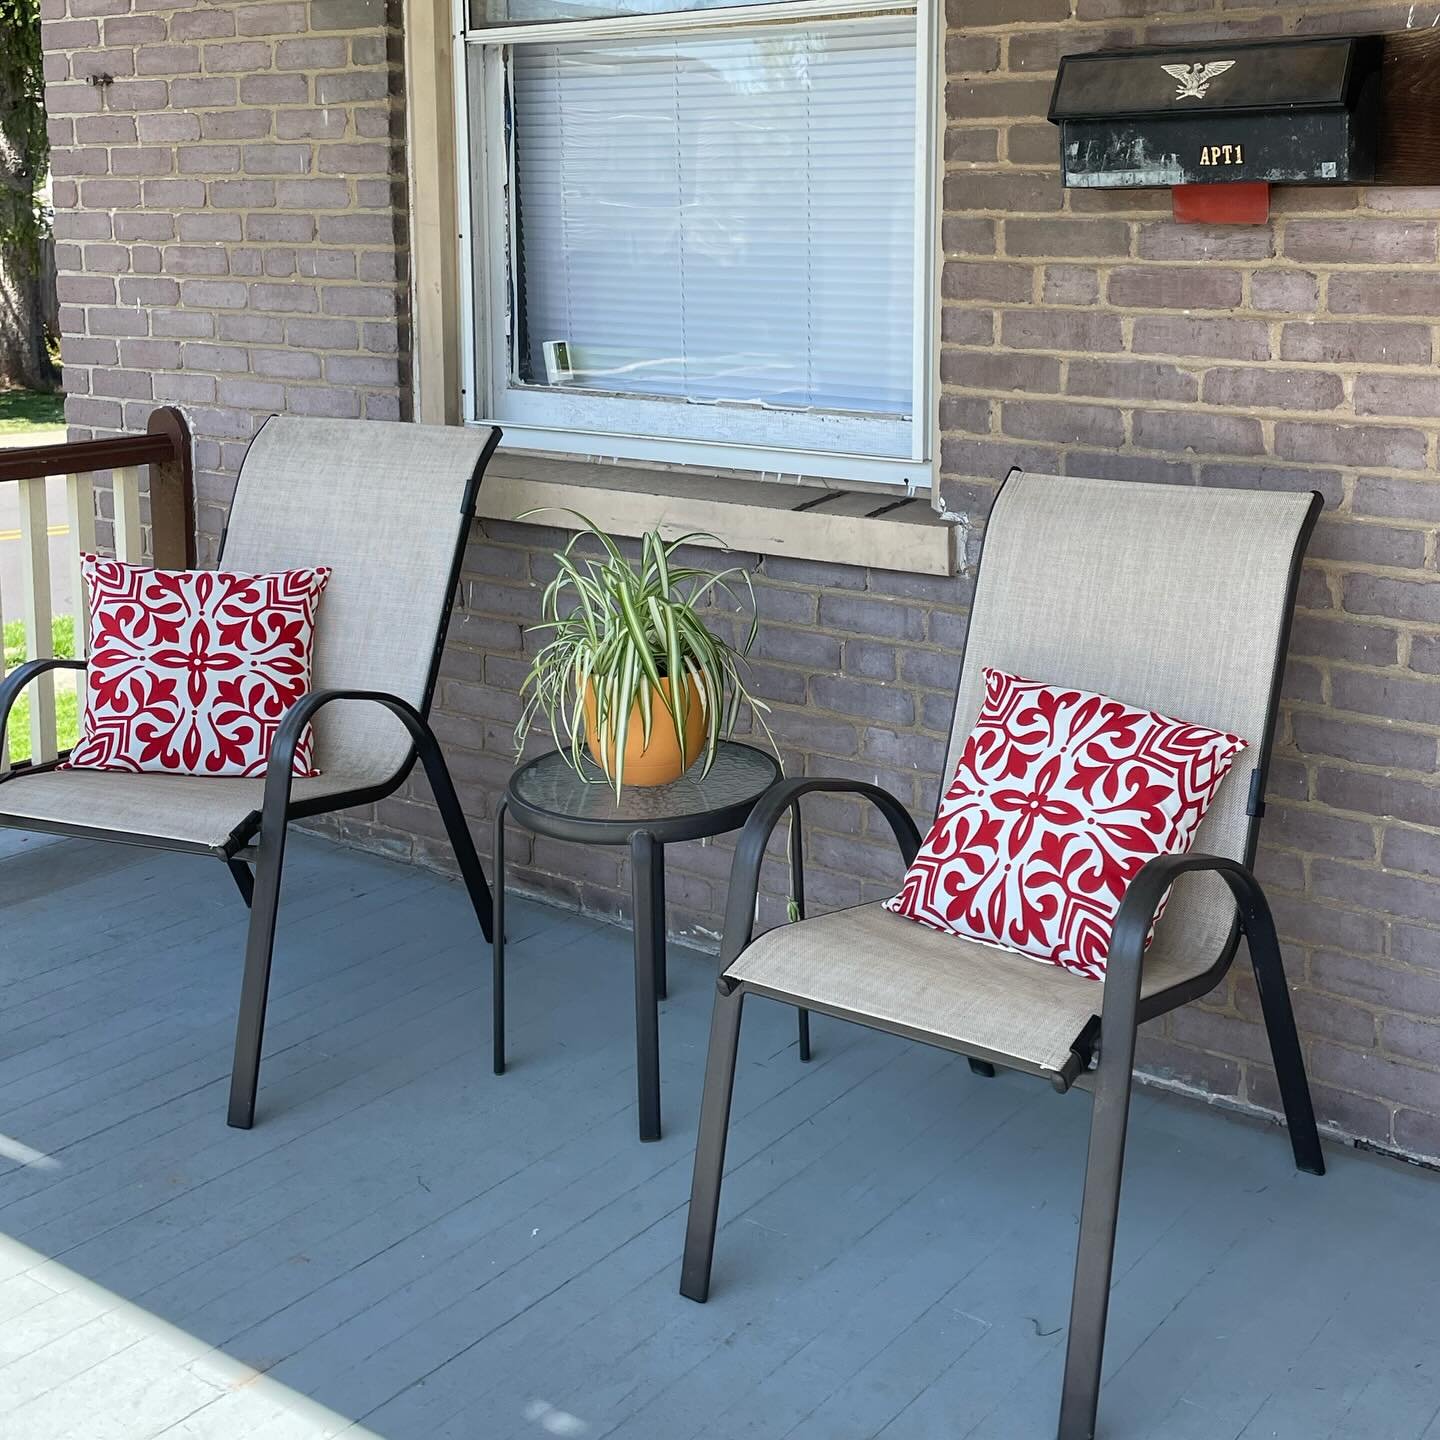 It&rsquo;s makes us so happy when there is an outdoor space and thankfully these outdoor chairs had been recently donated.  Matthew had the biggest smile when he came up the steps and saw these. 

#LoveForACause #VolunteerWithPurpose #MarvinsHomeHero